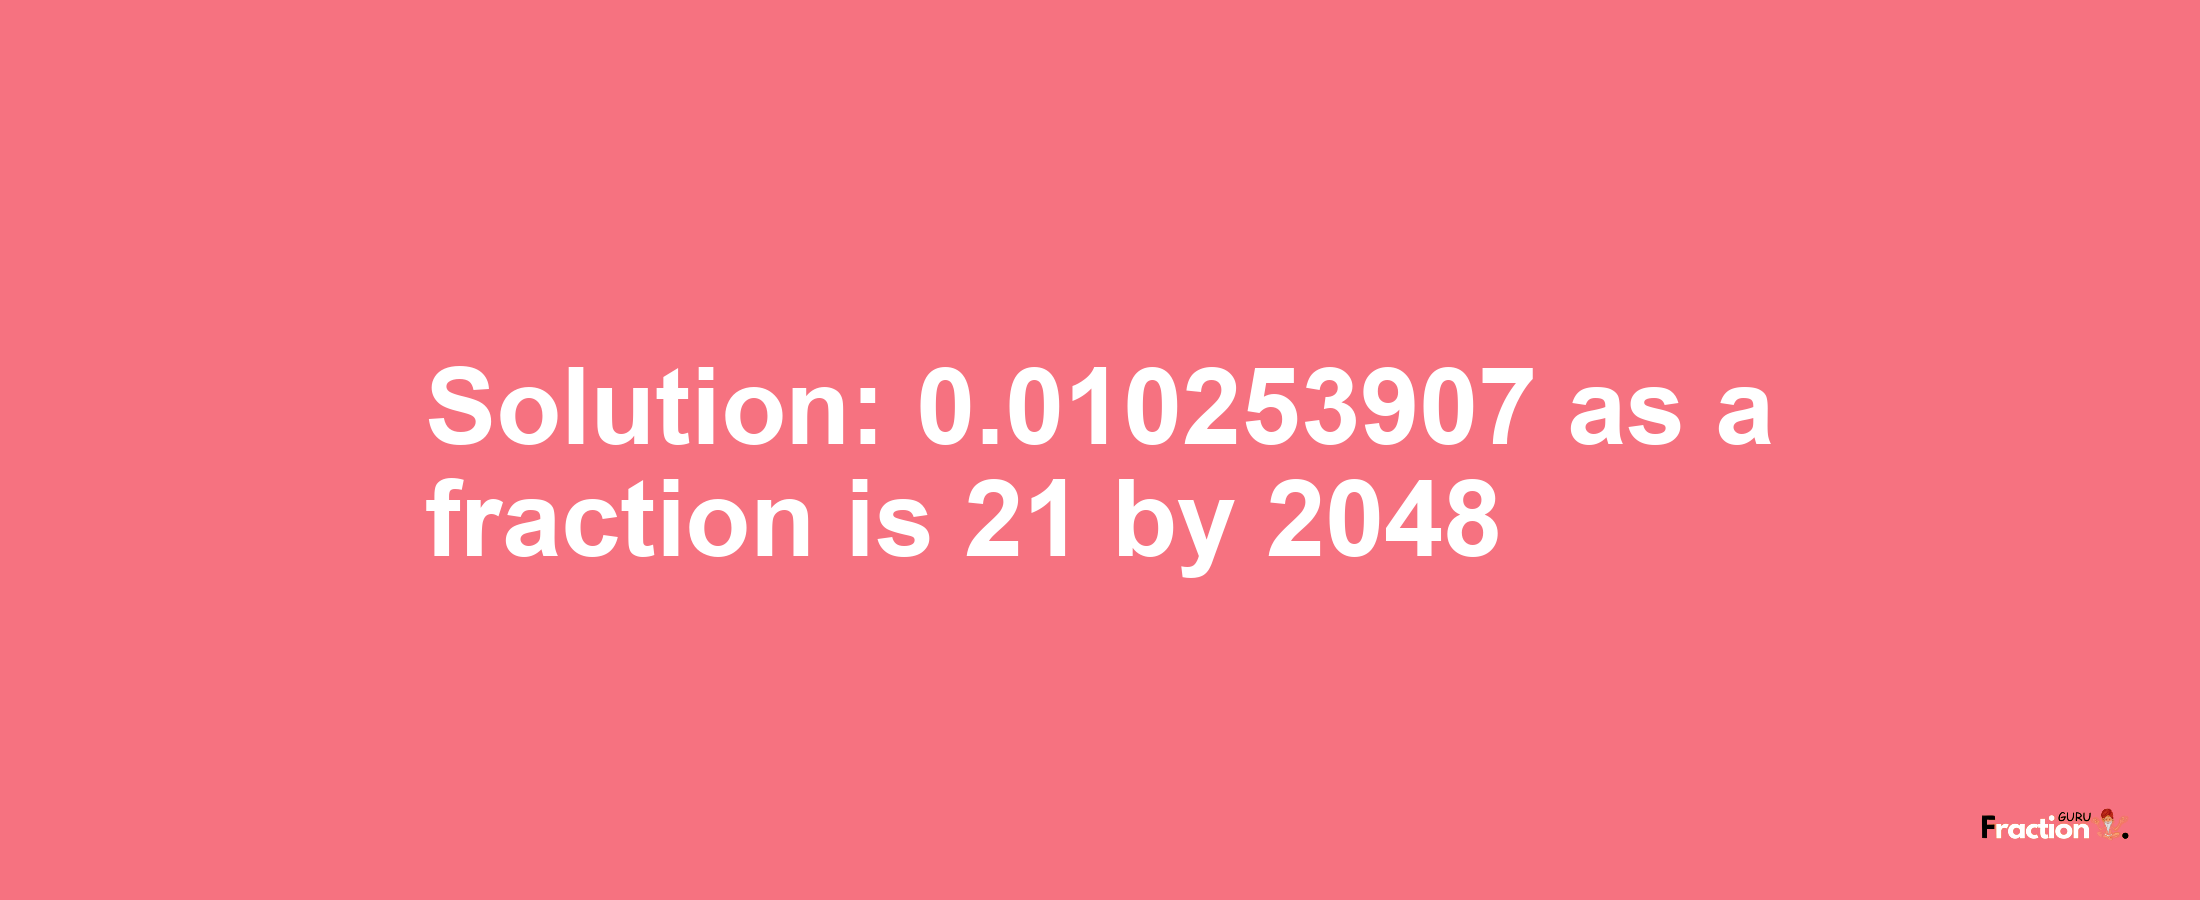 Solution:0.010253907 as a fraction is 21/2048